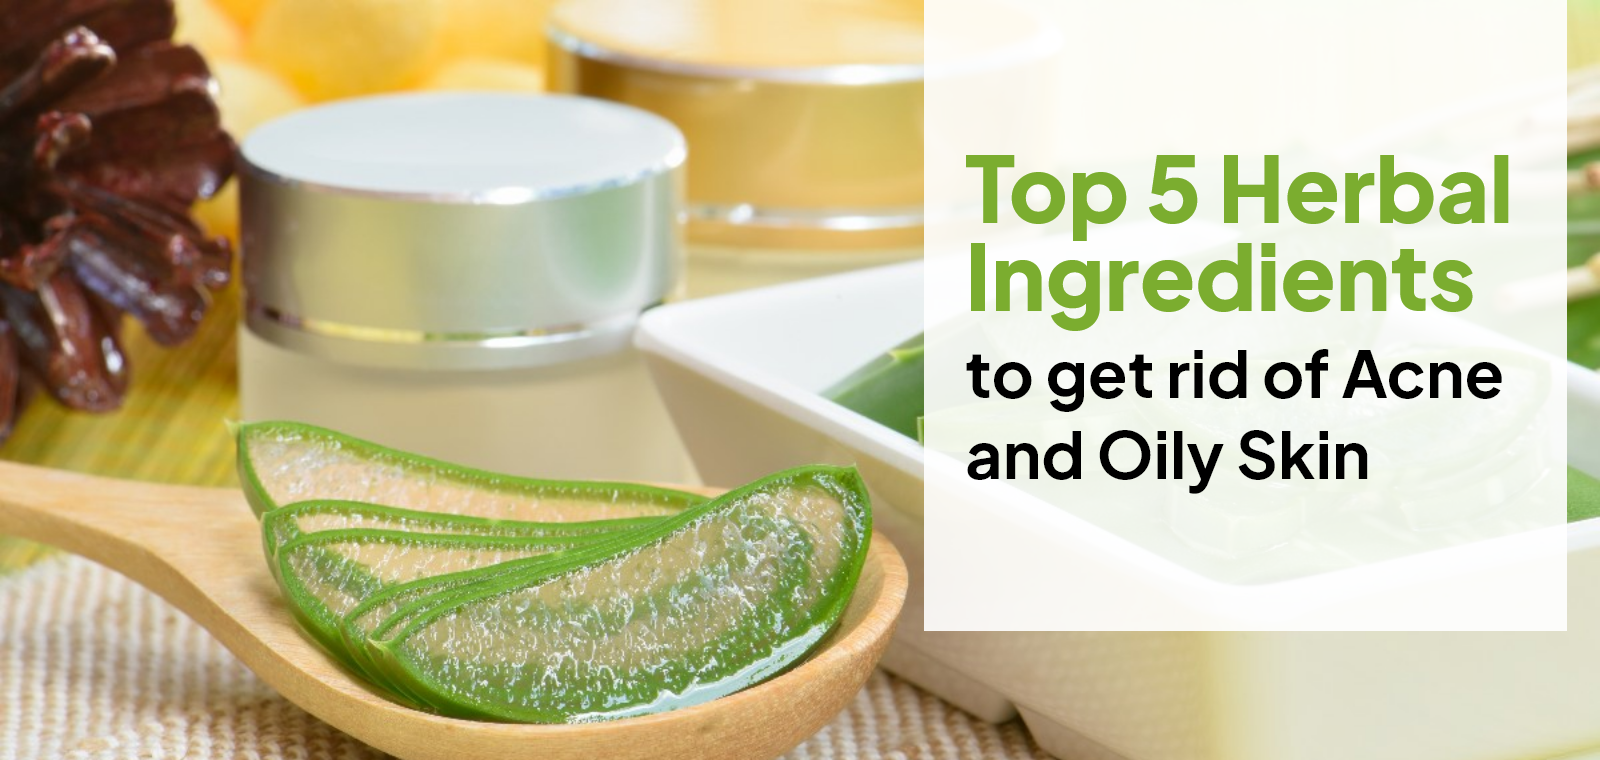 Top 5 Herbal Ingredients to get rid of Acne and Oily Skin